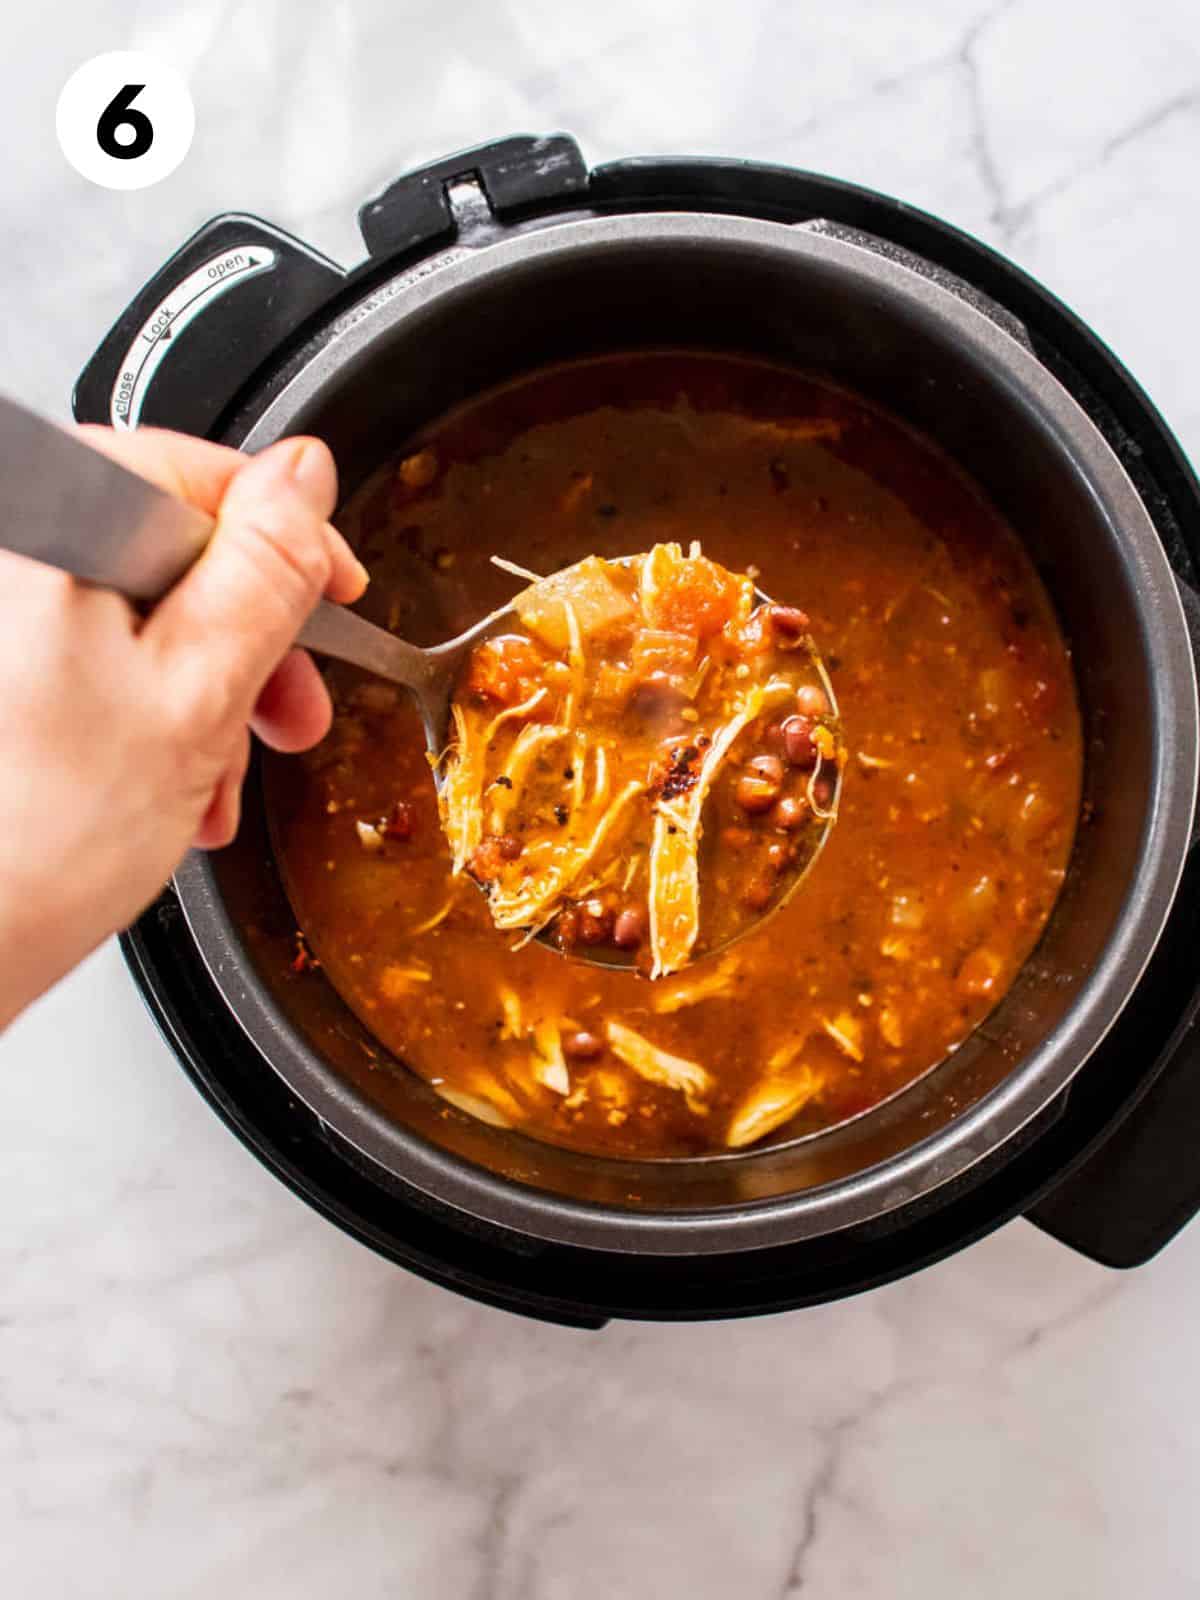 A hand holding a ladle scooping up a serving of chicken taco soup.